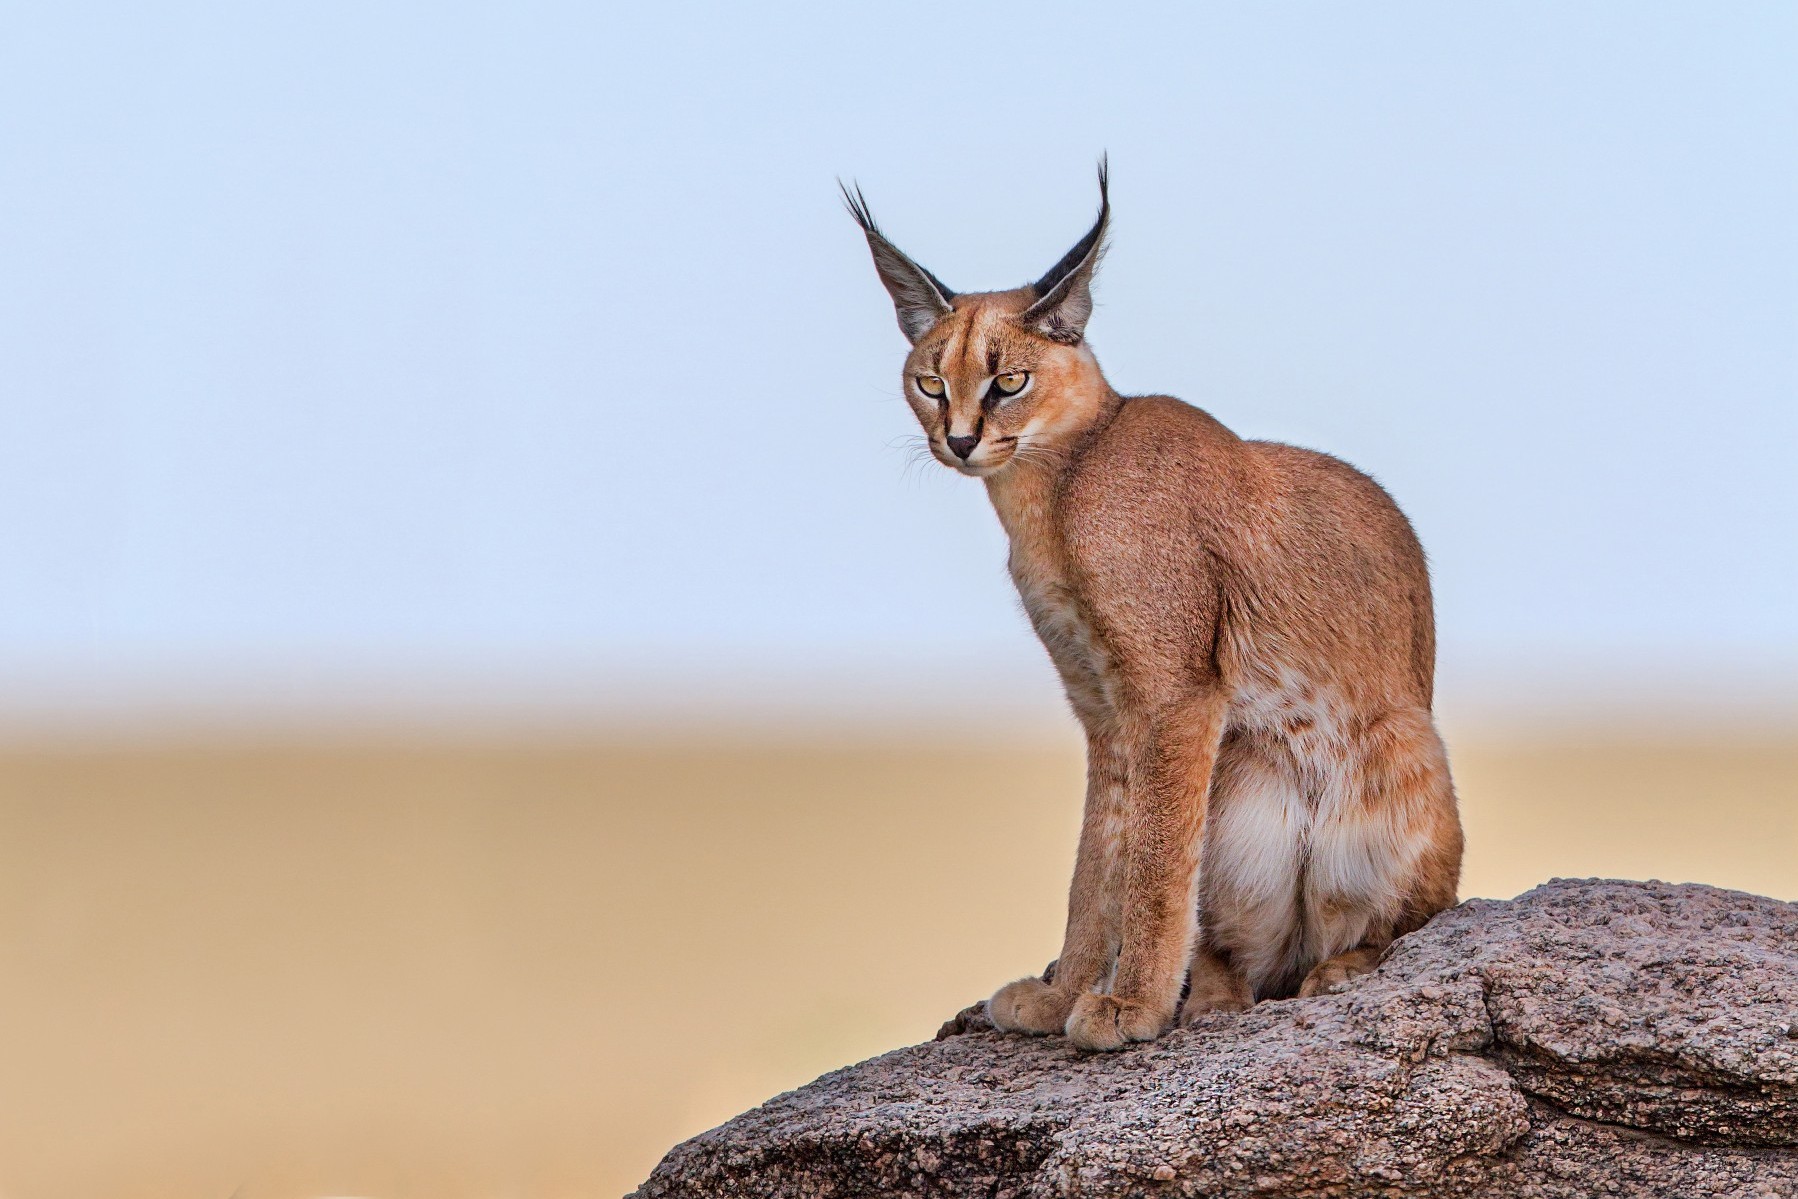 Pictured: A caracal in the wild.